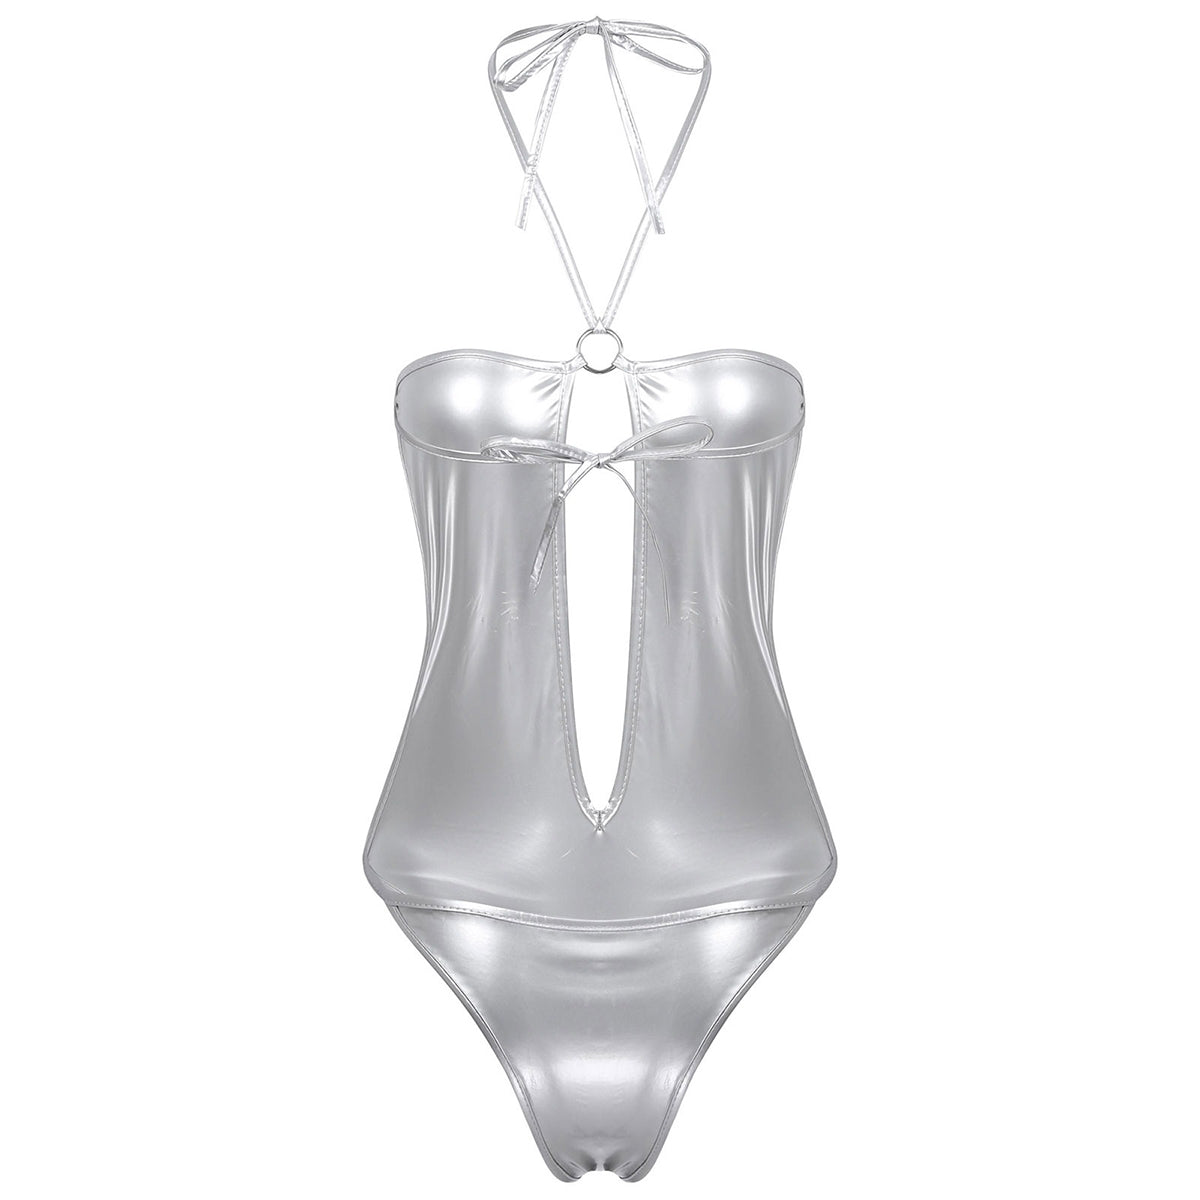 Sexy Shiny Patent Leather Hollow Out Women's Bodysuit / High Cut Wet Look Lingerie / Halter Leotard - HARD'N'HEAVY